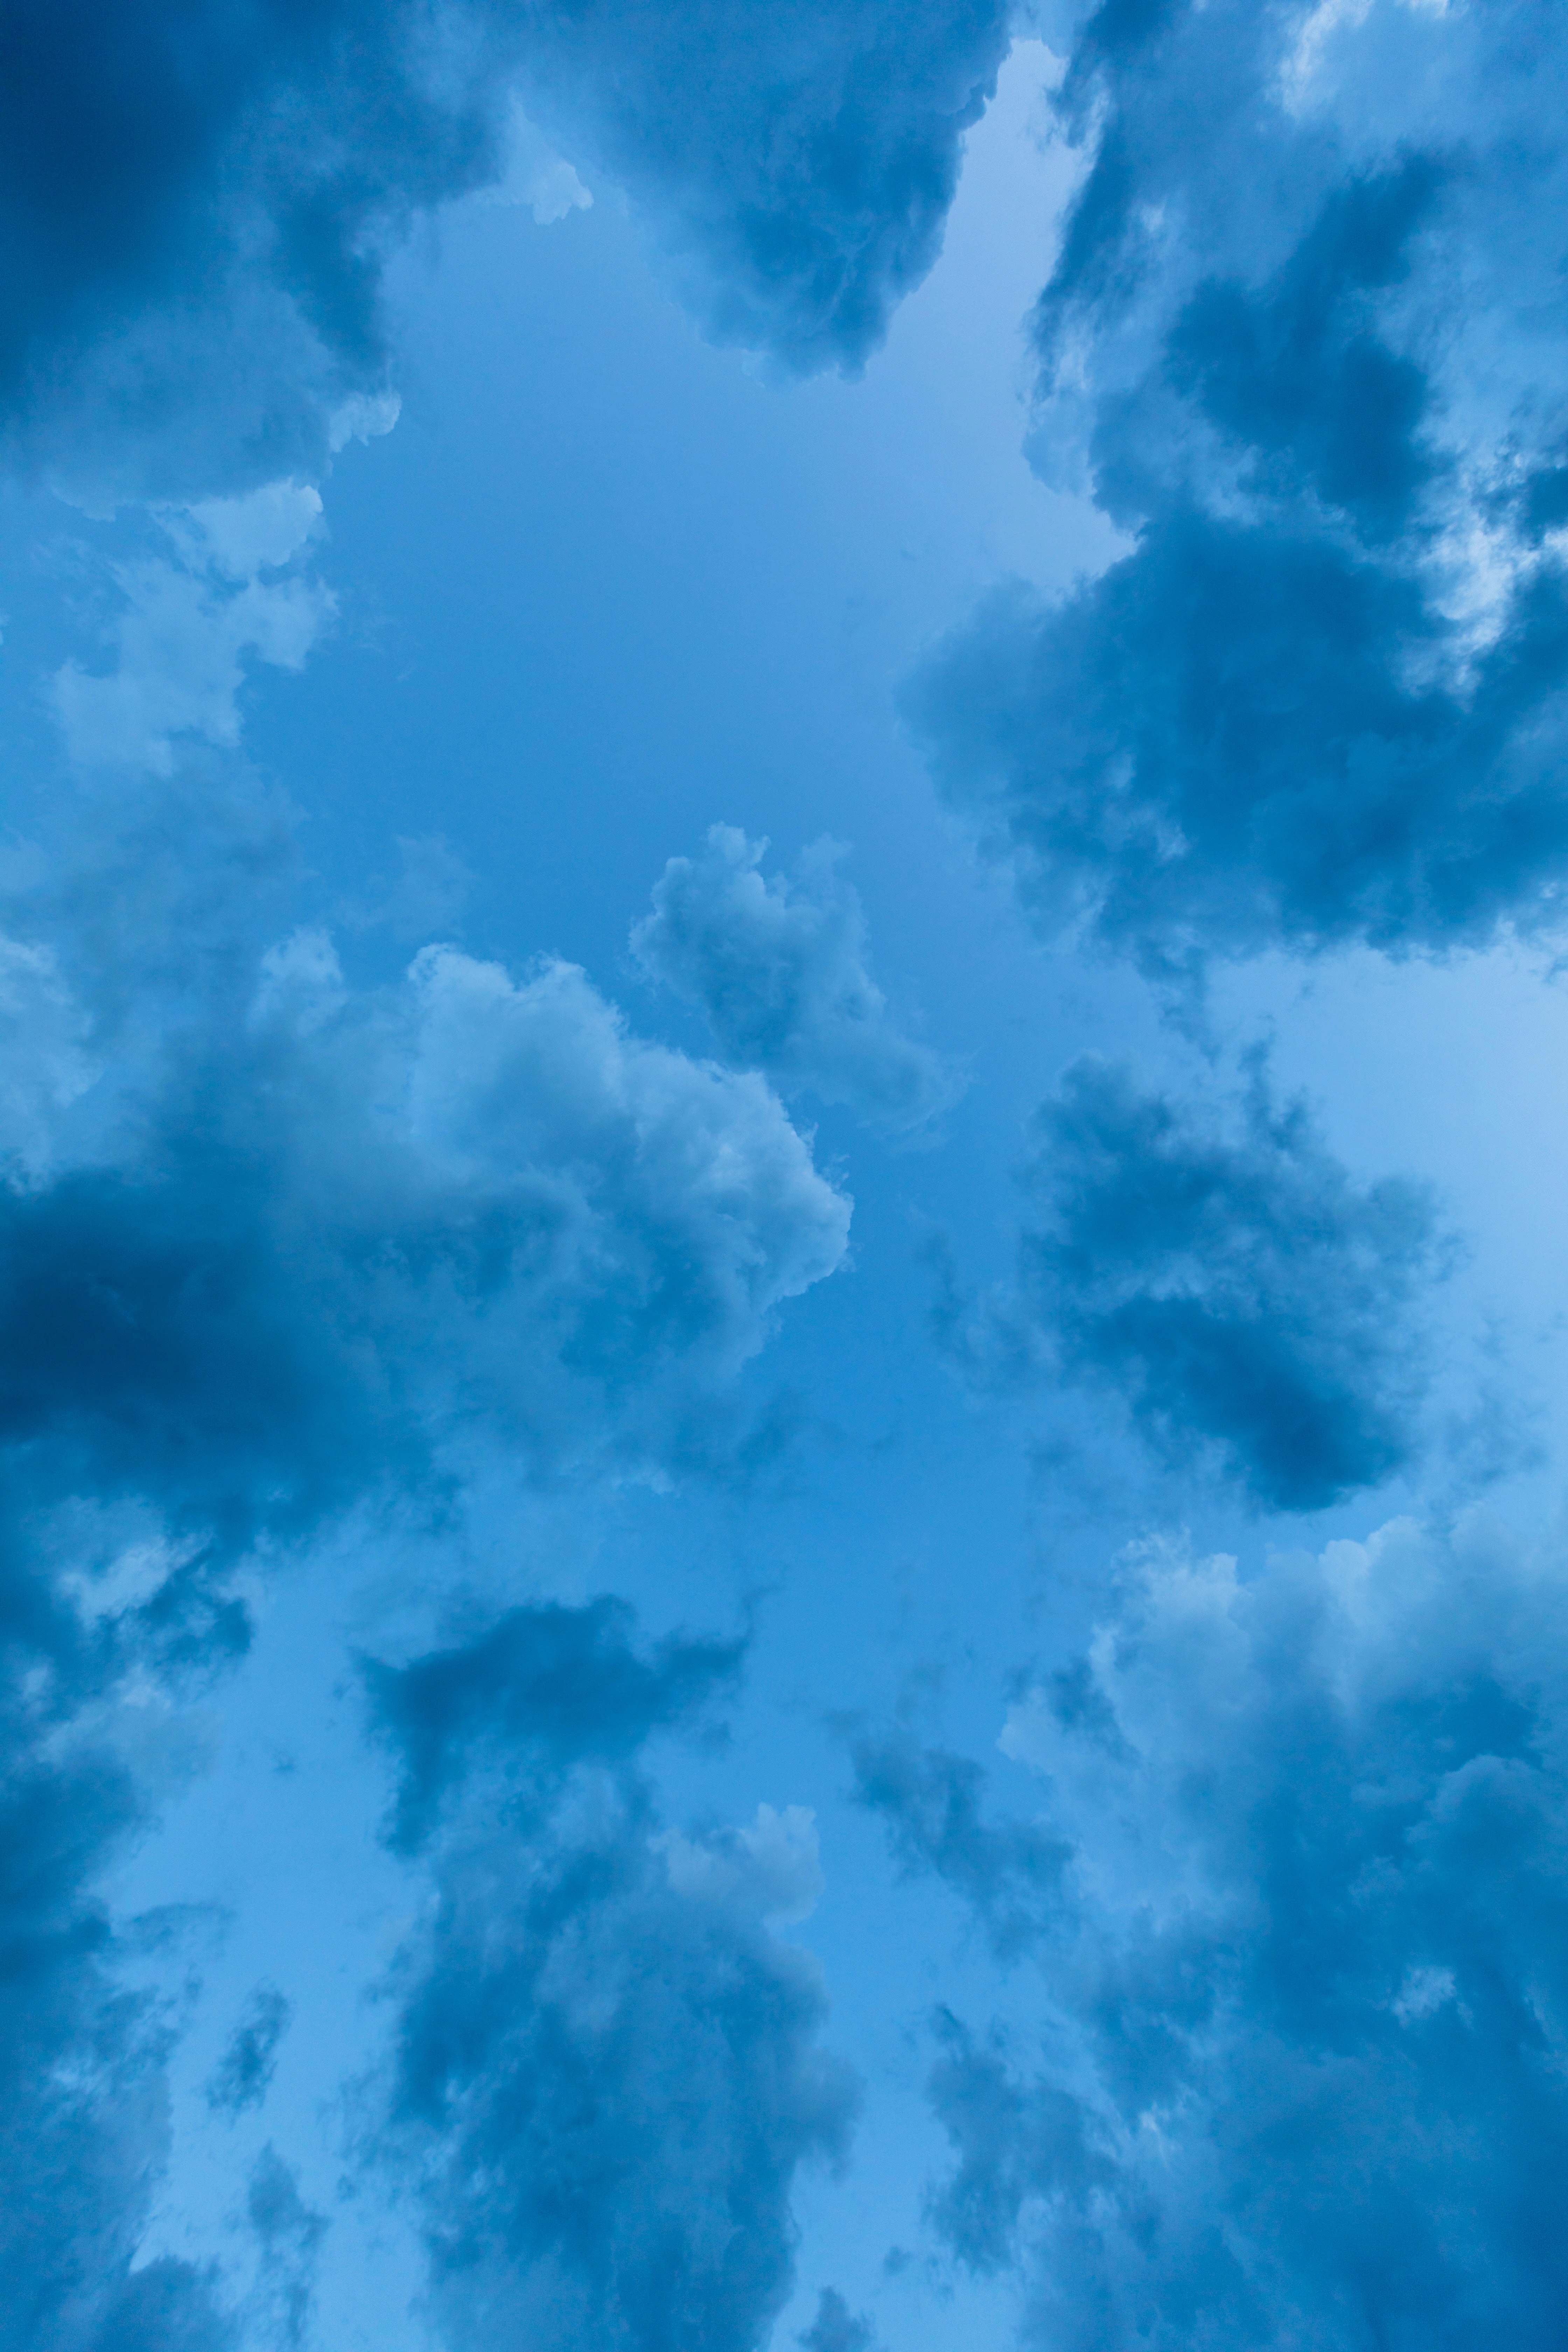 sky low angle view of blue clouds azure sky Image - Free Stock Photo